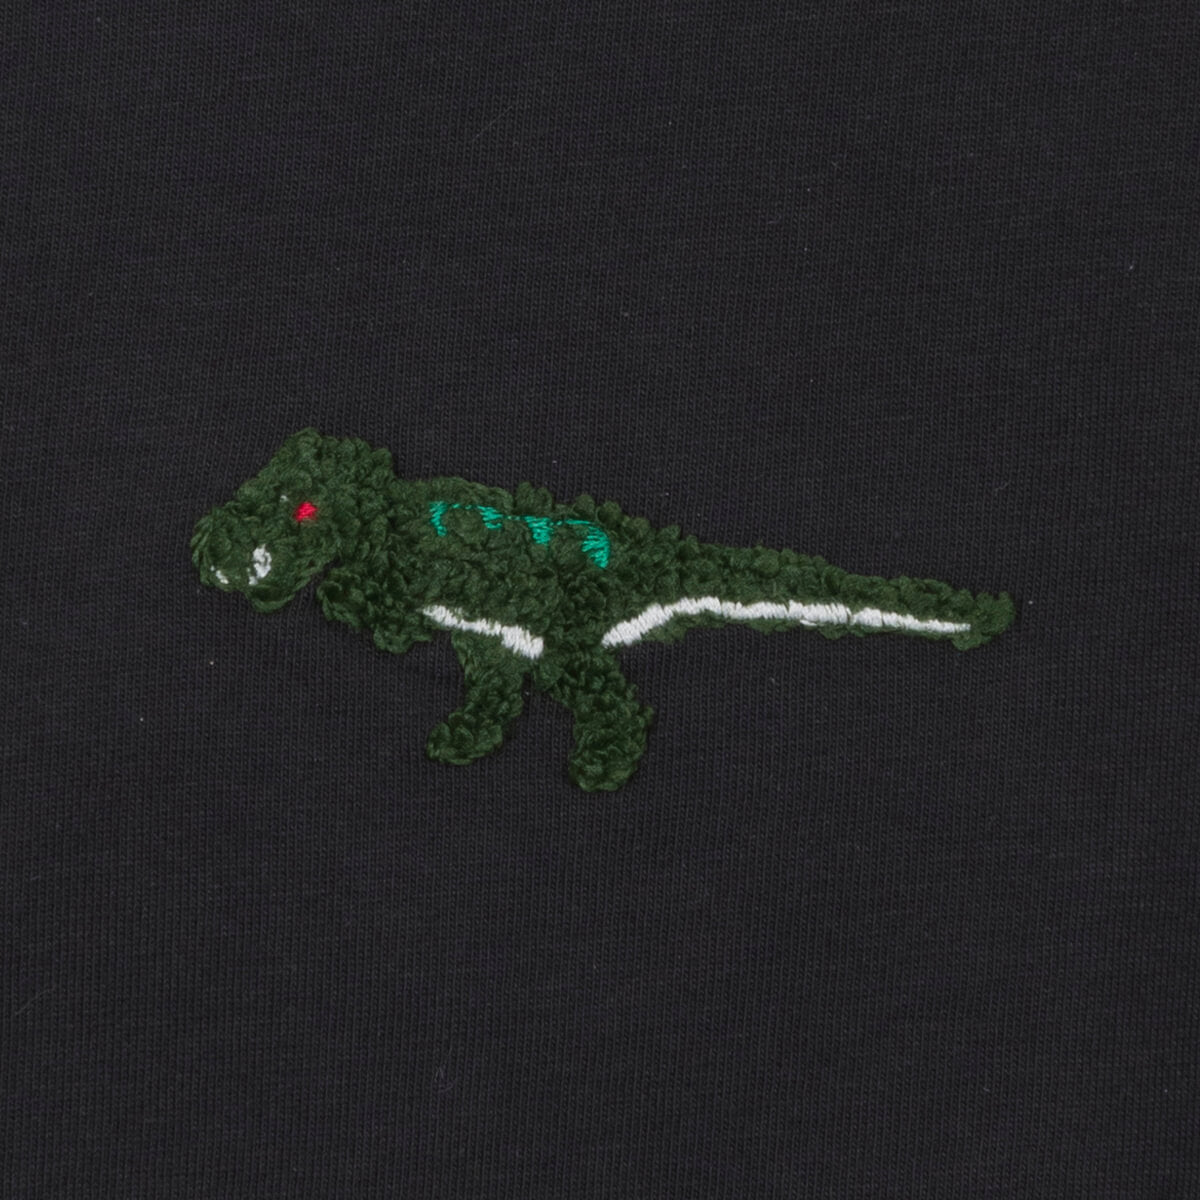 Dinosaurs Kids T-Shirt made from 100% cotton with embroidered t-rex detail